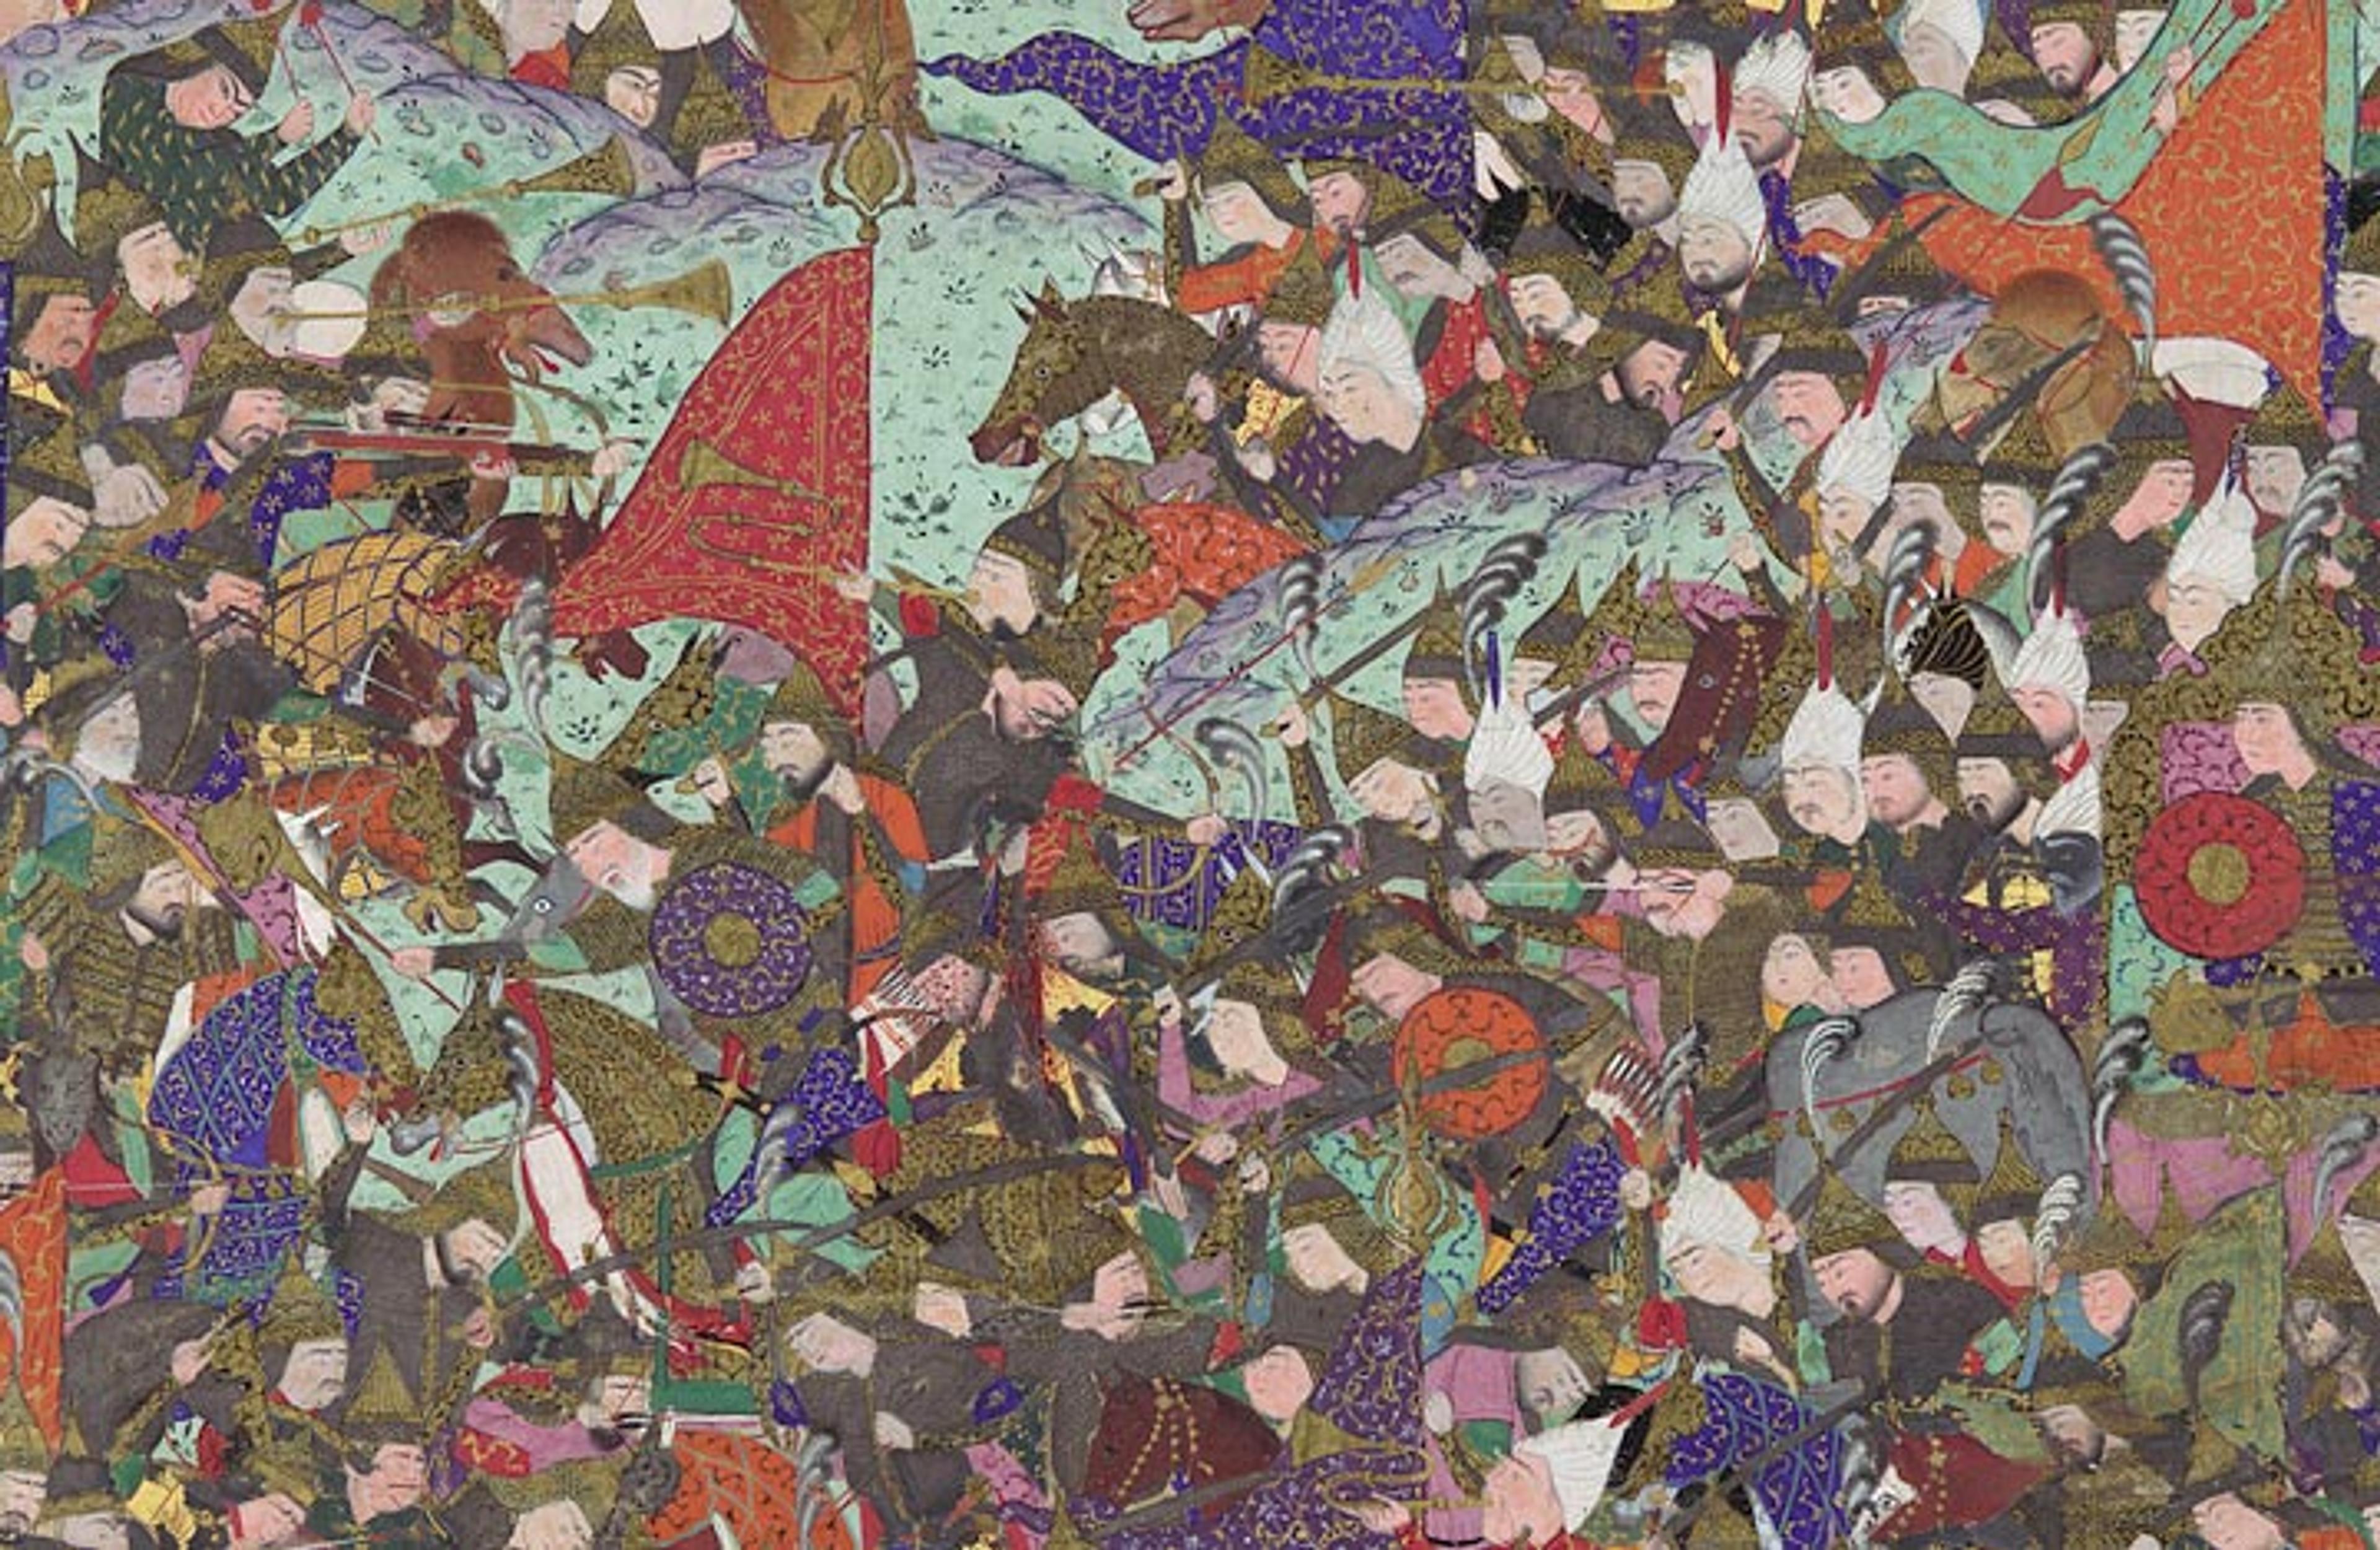 Detail view of a 16th-century Islamic manuscript depicting two large armies at battle